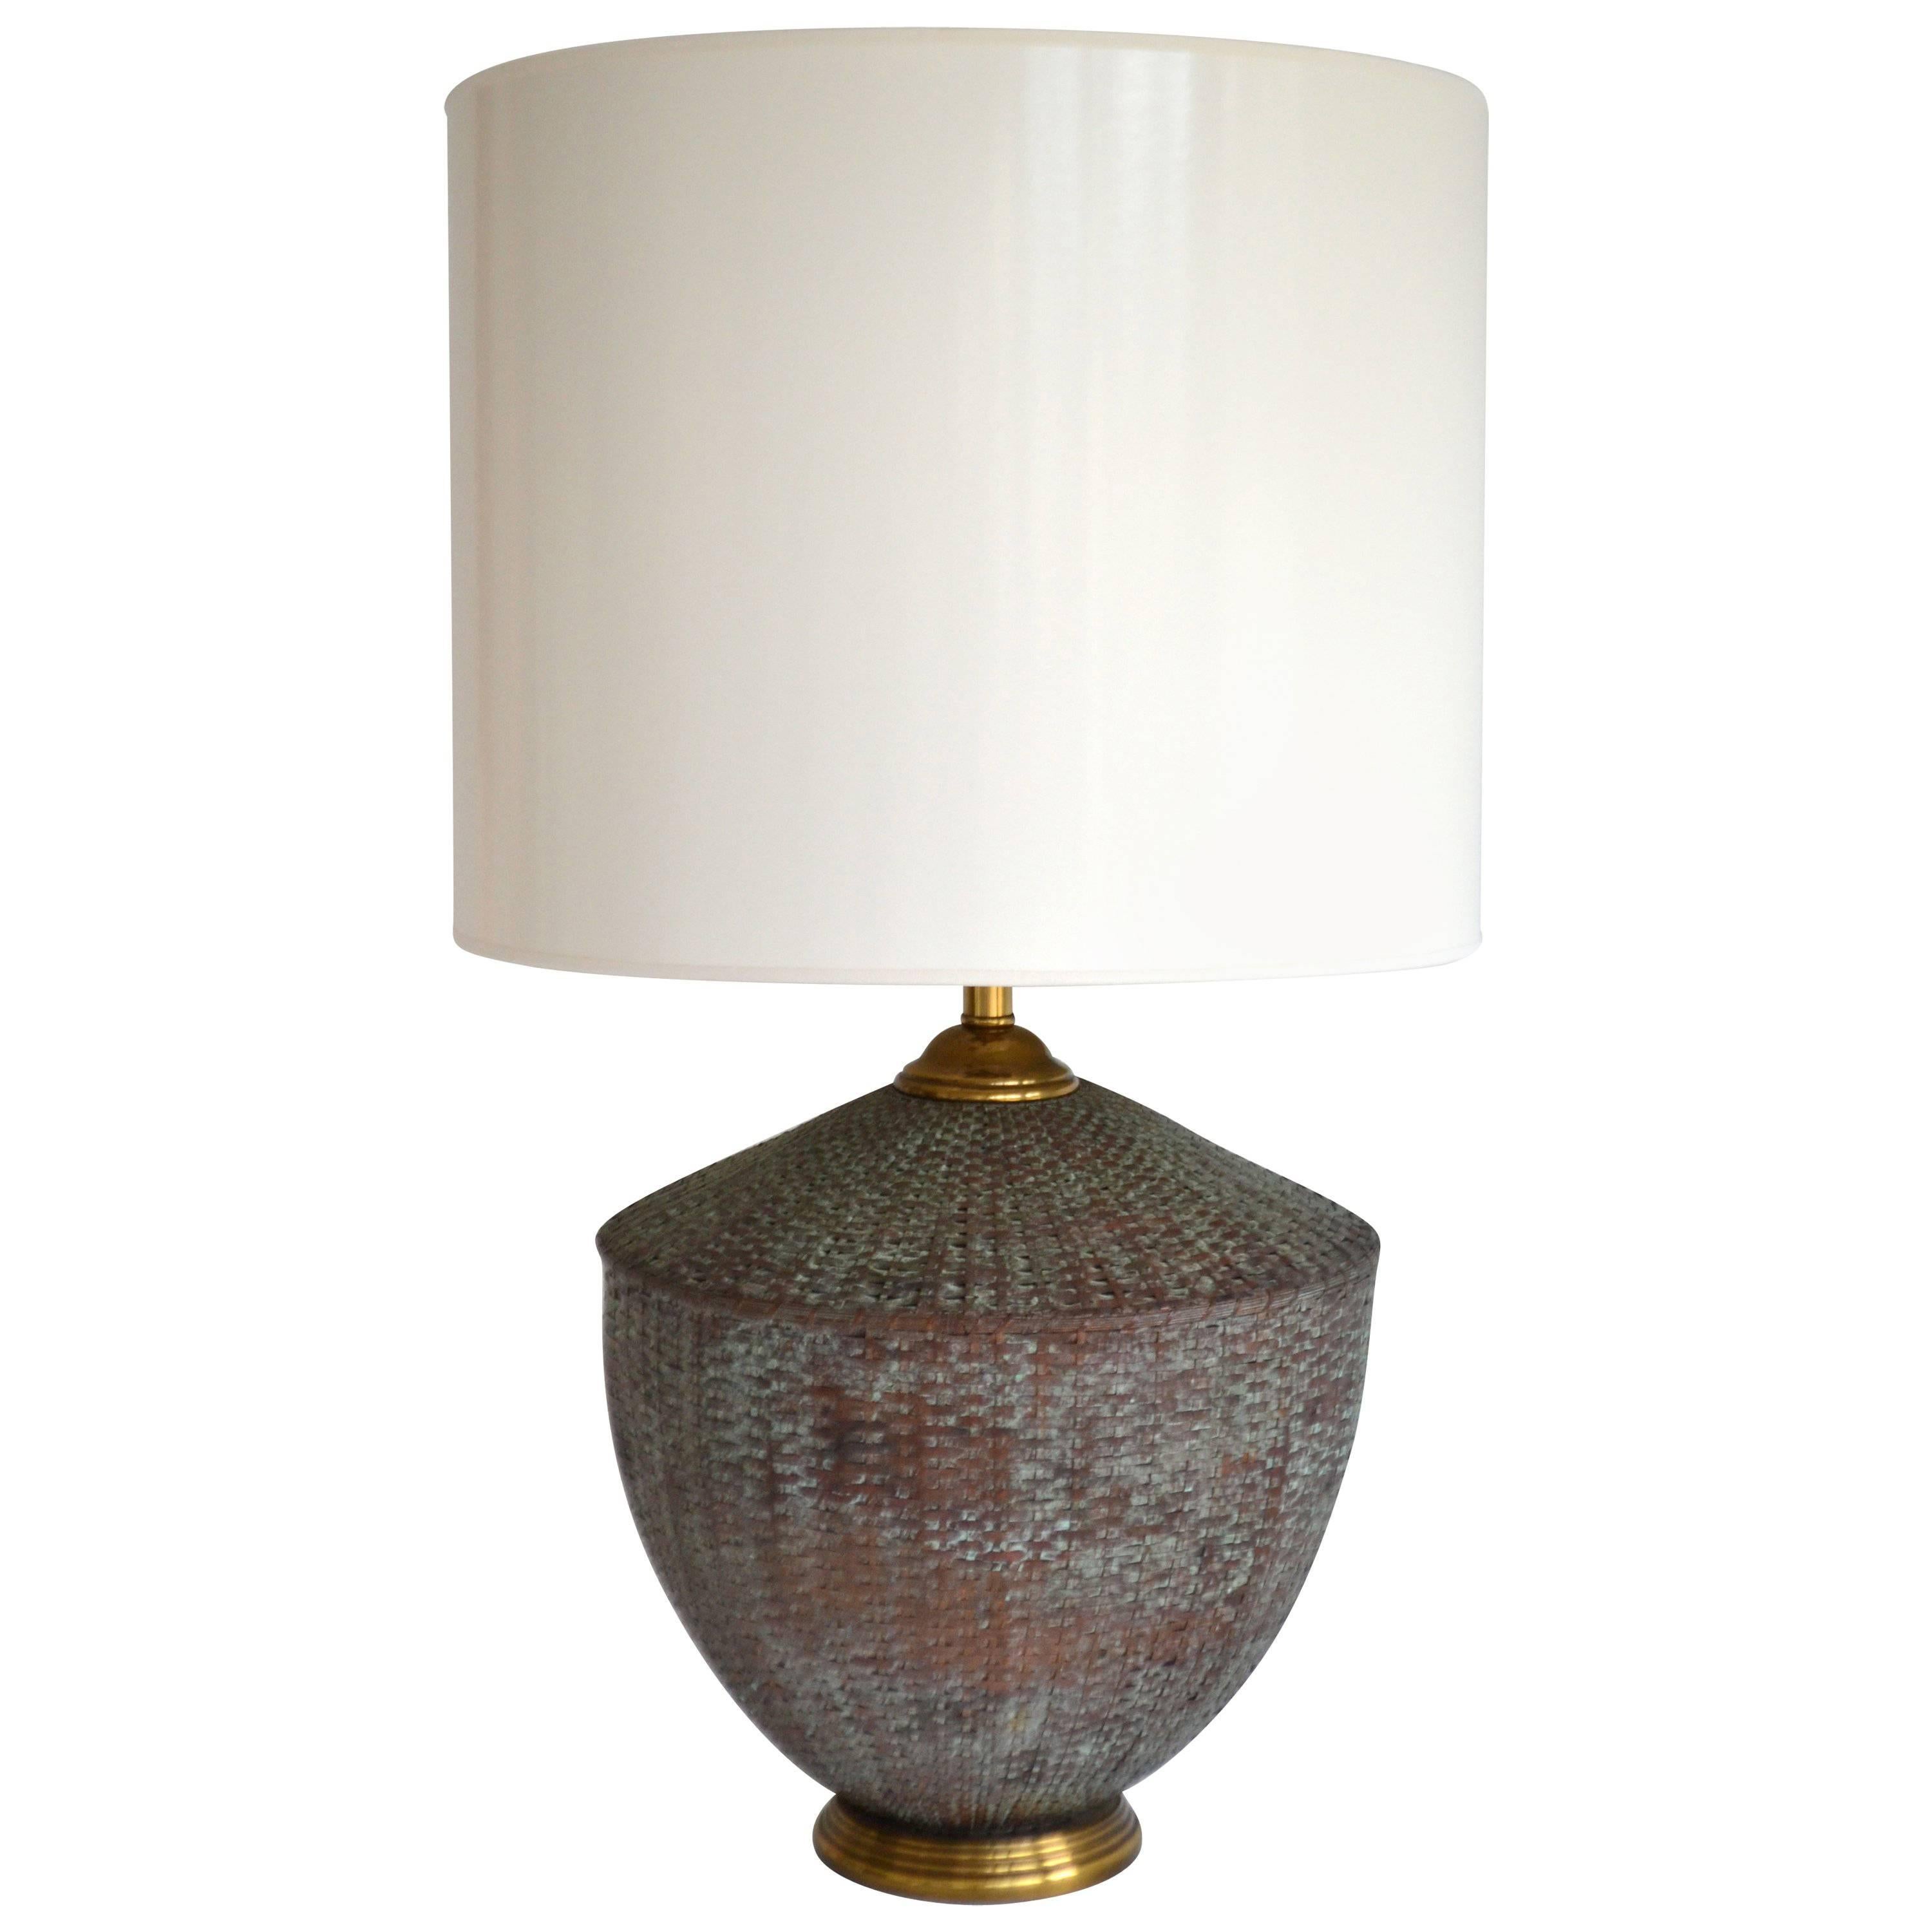 Woven Copper Basket Form Table Lamp For Sale